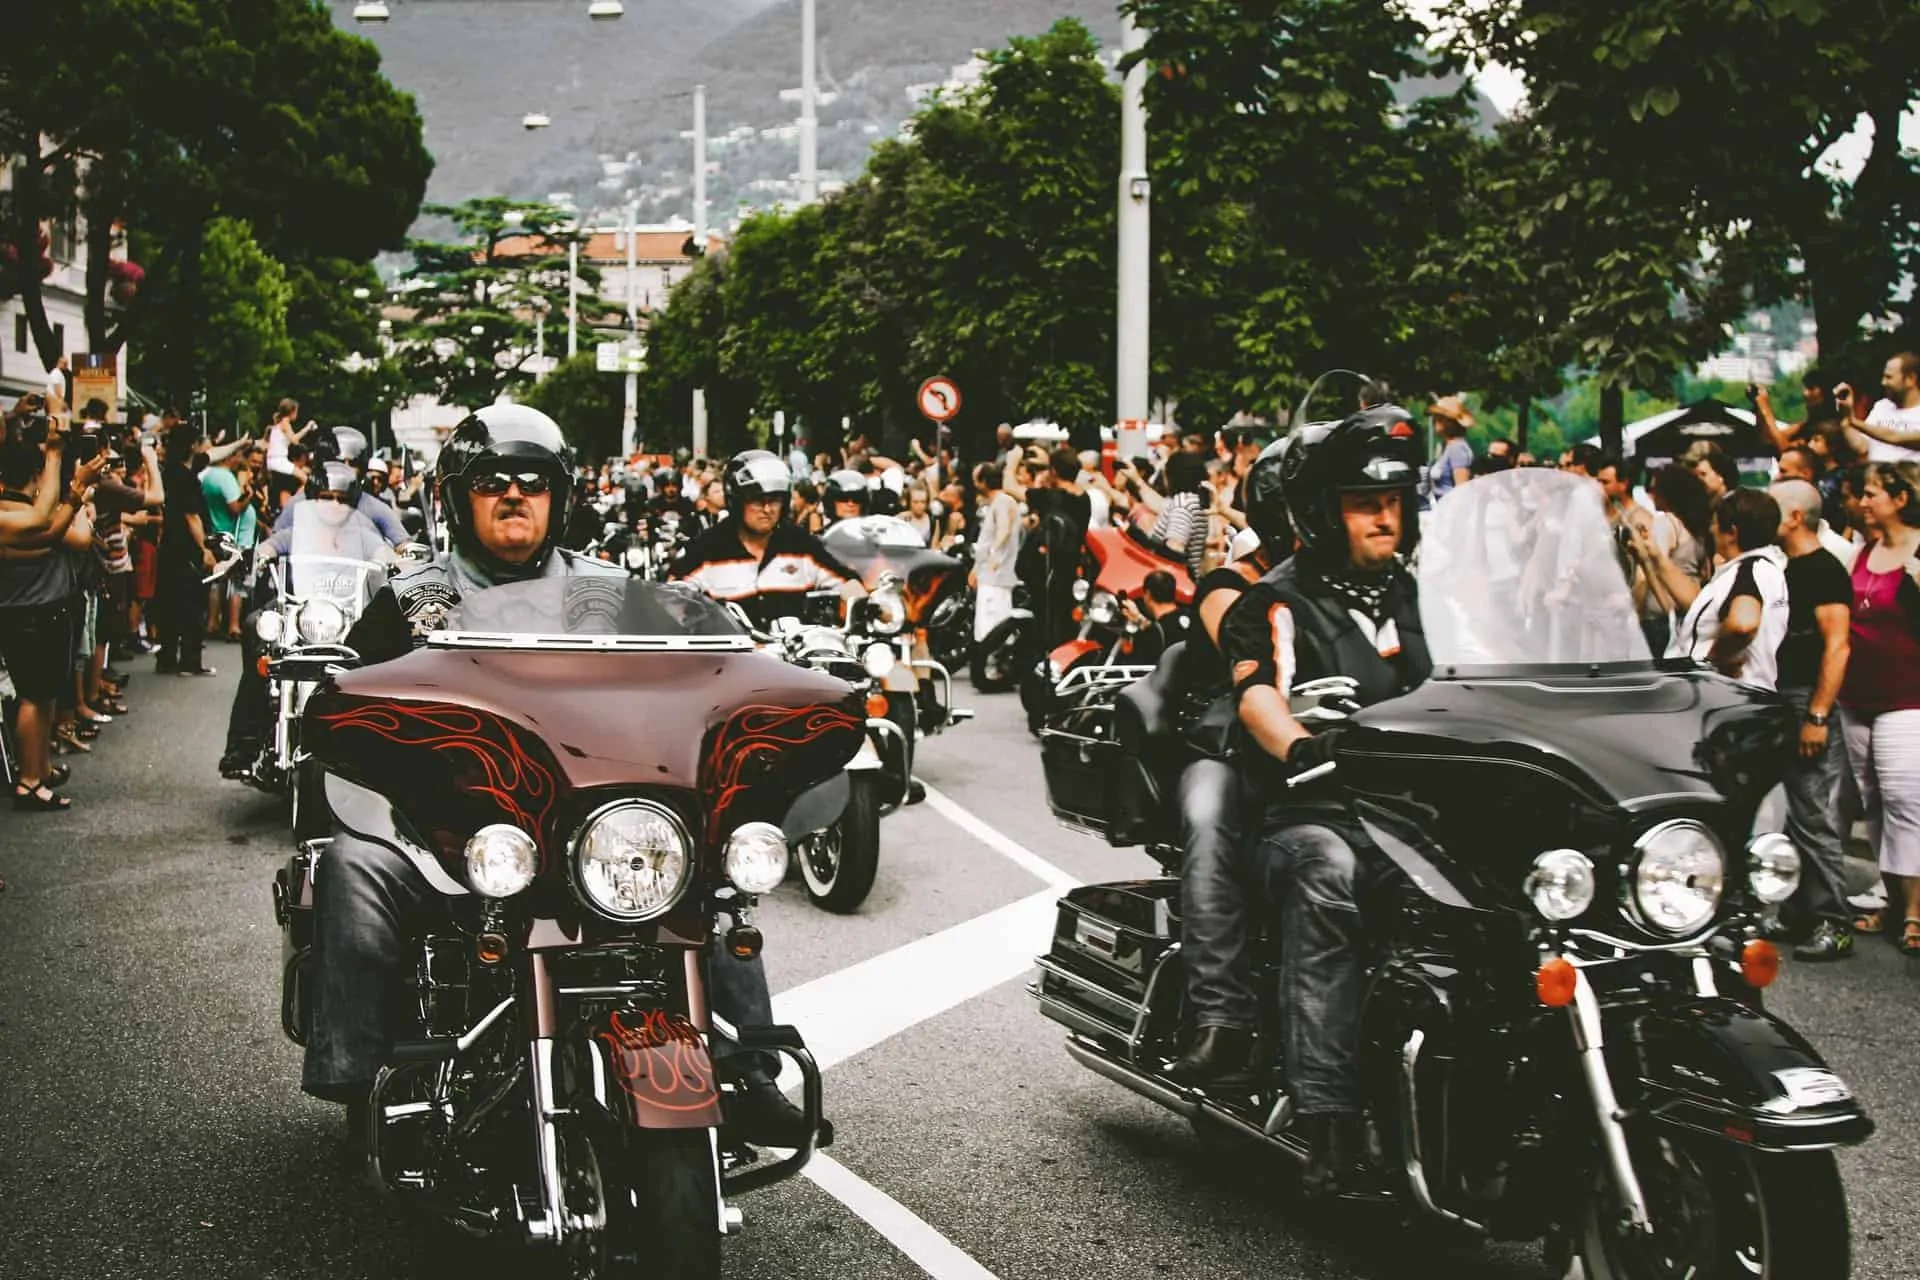 motorcycle riders event